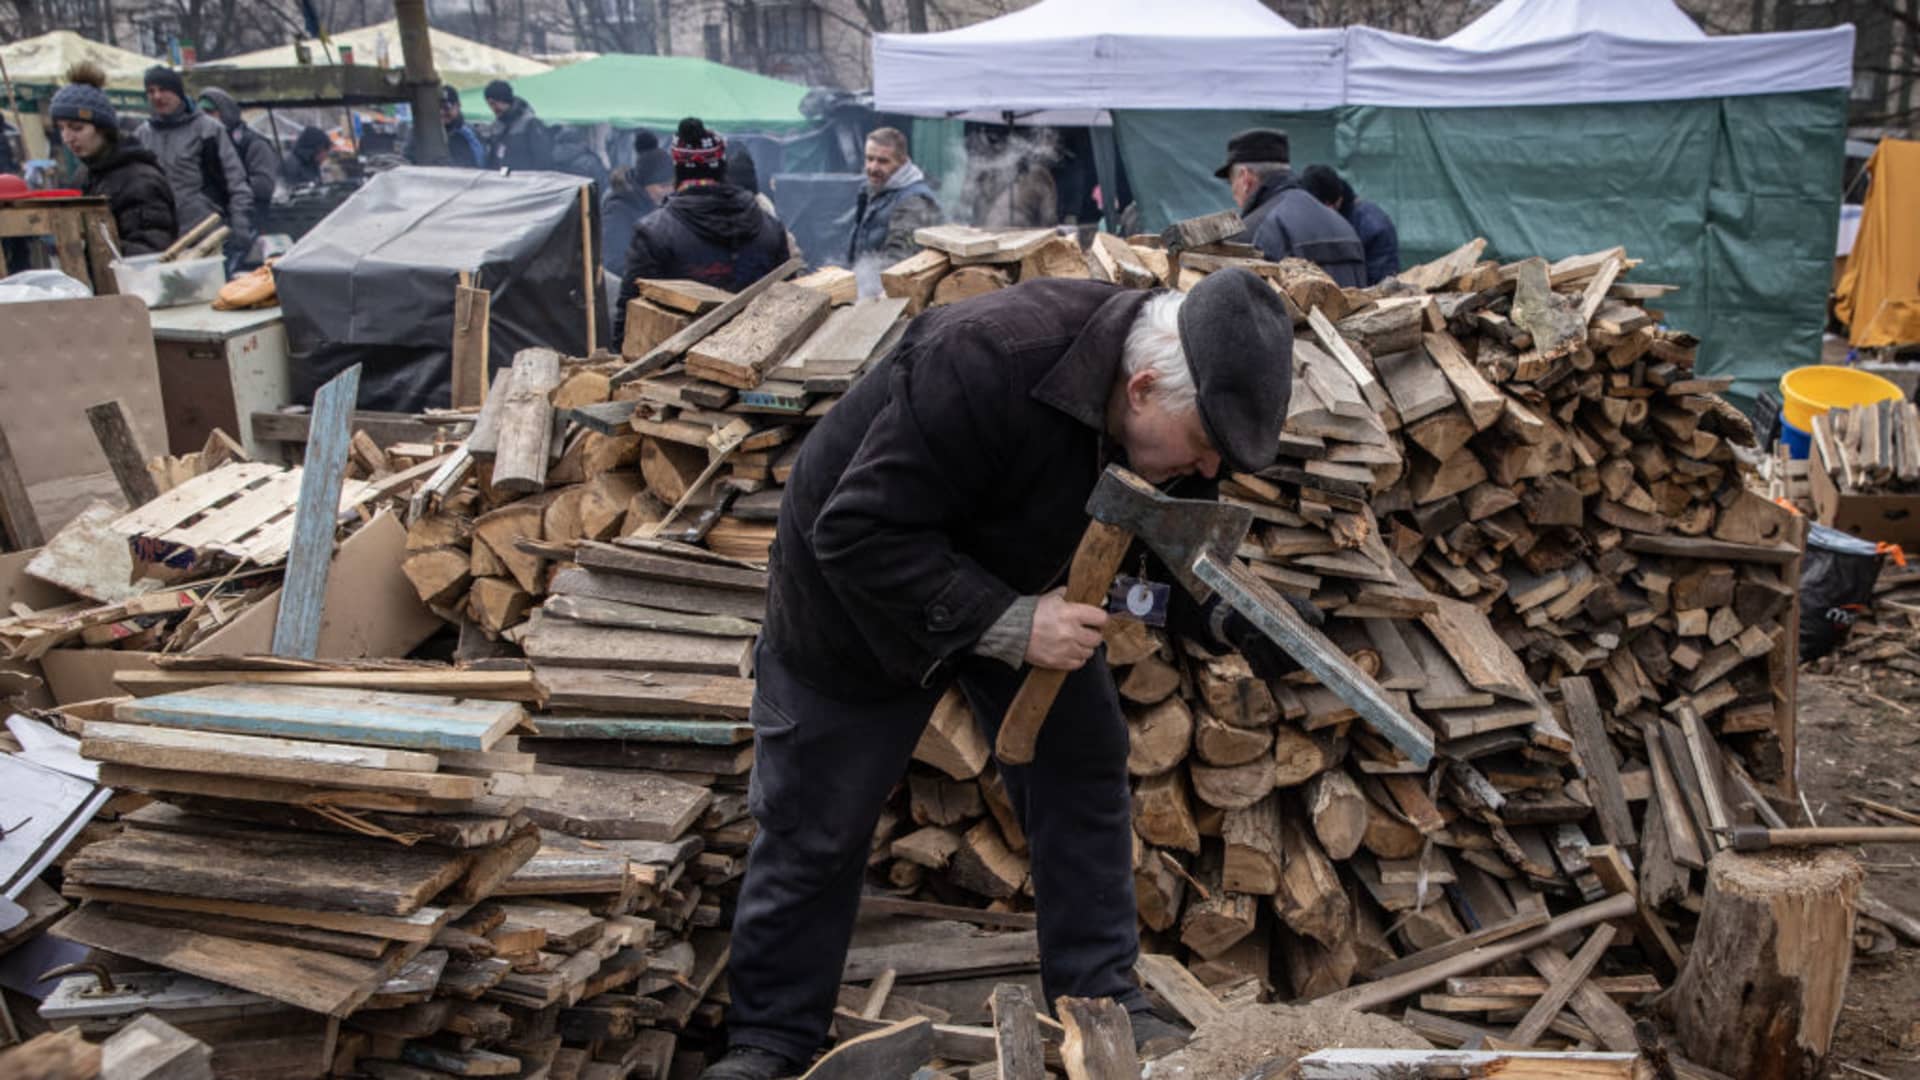 A volunteer cuts wood for fires at a roadside camp setup to help serve meals and assist civilians and soldiers close to the north eastern frontline on March 09, 2022 in Kyiv, Ukraine.